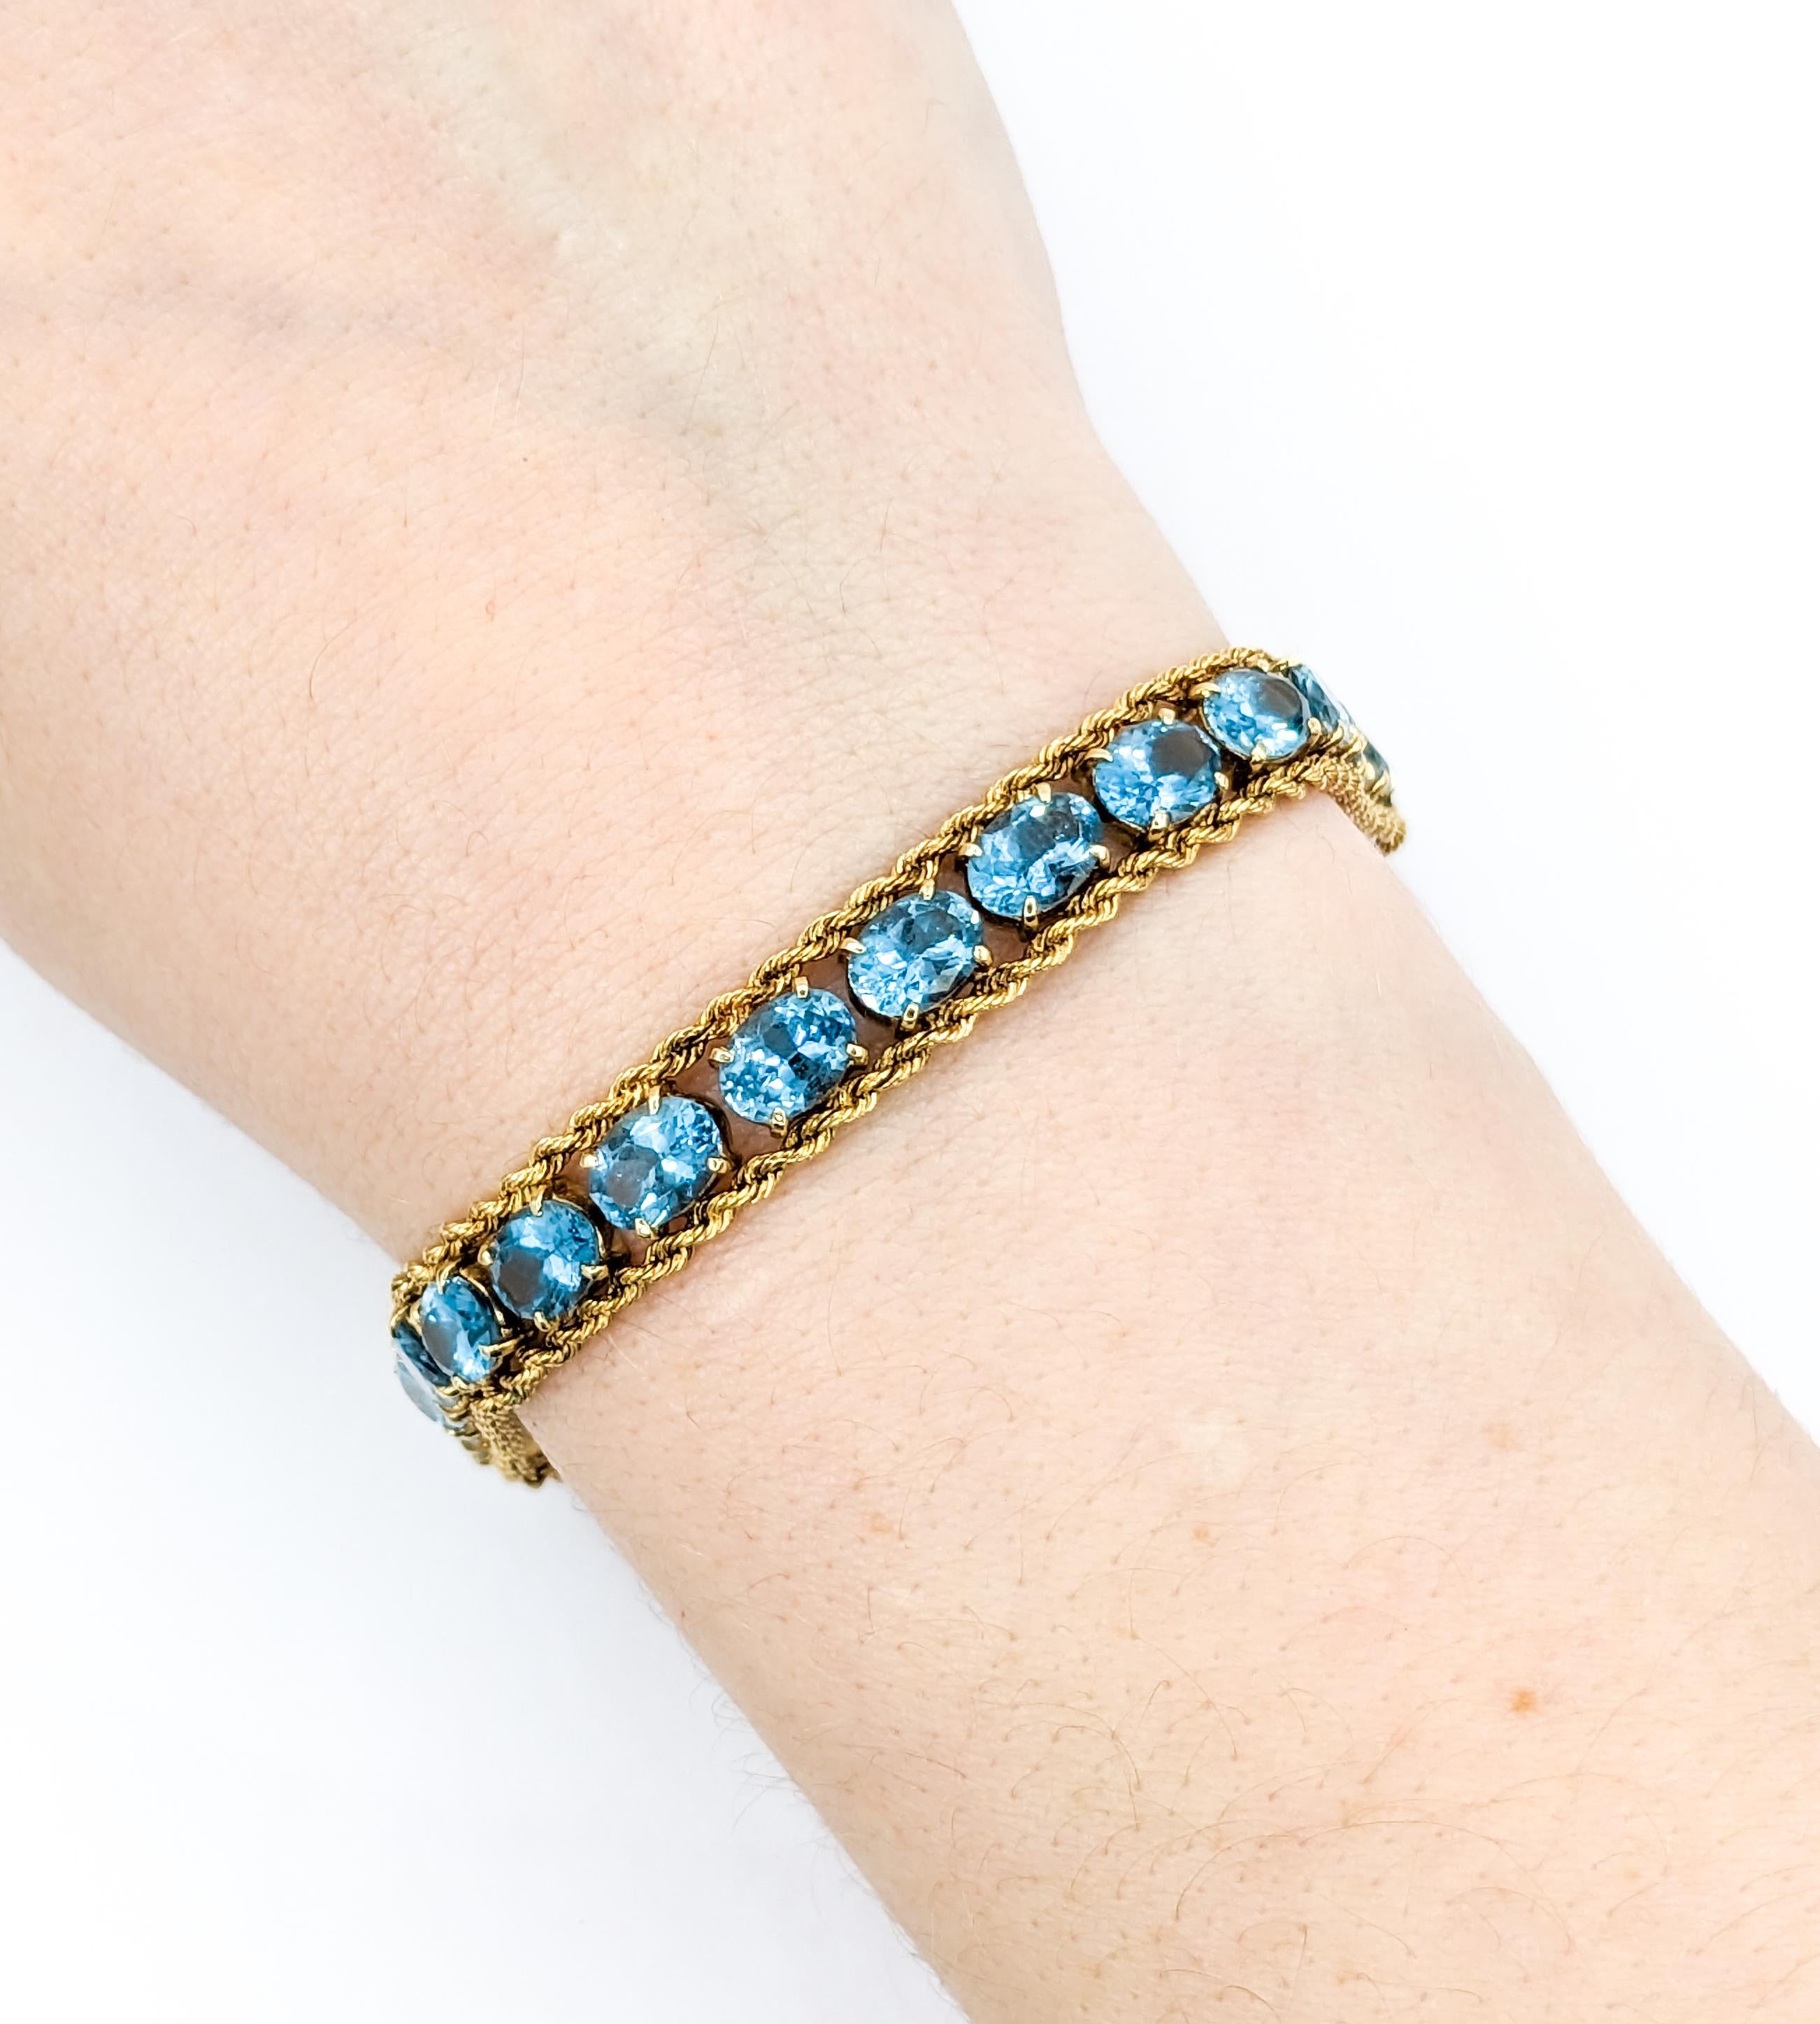 Sparkling Blue Topaz & 14K Gold Chain Bracelet

Immerse yourself in the vibrant elegance of this stunning bracelet, crafted in the warm glow of 14kt yellow gold. Adorned with twenty-four captivating oval-cut blue topaz stones, each measuring 5 x